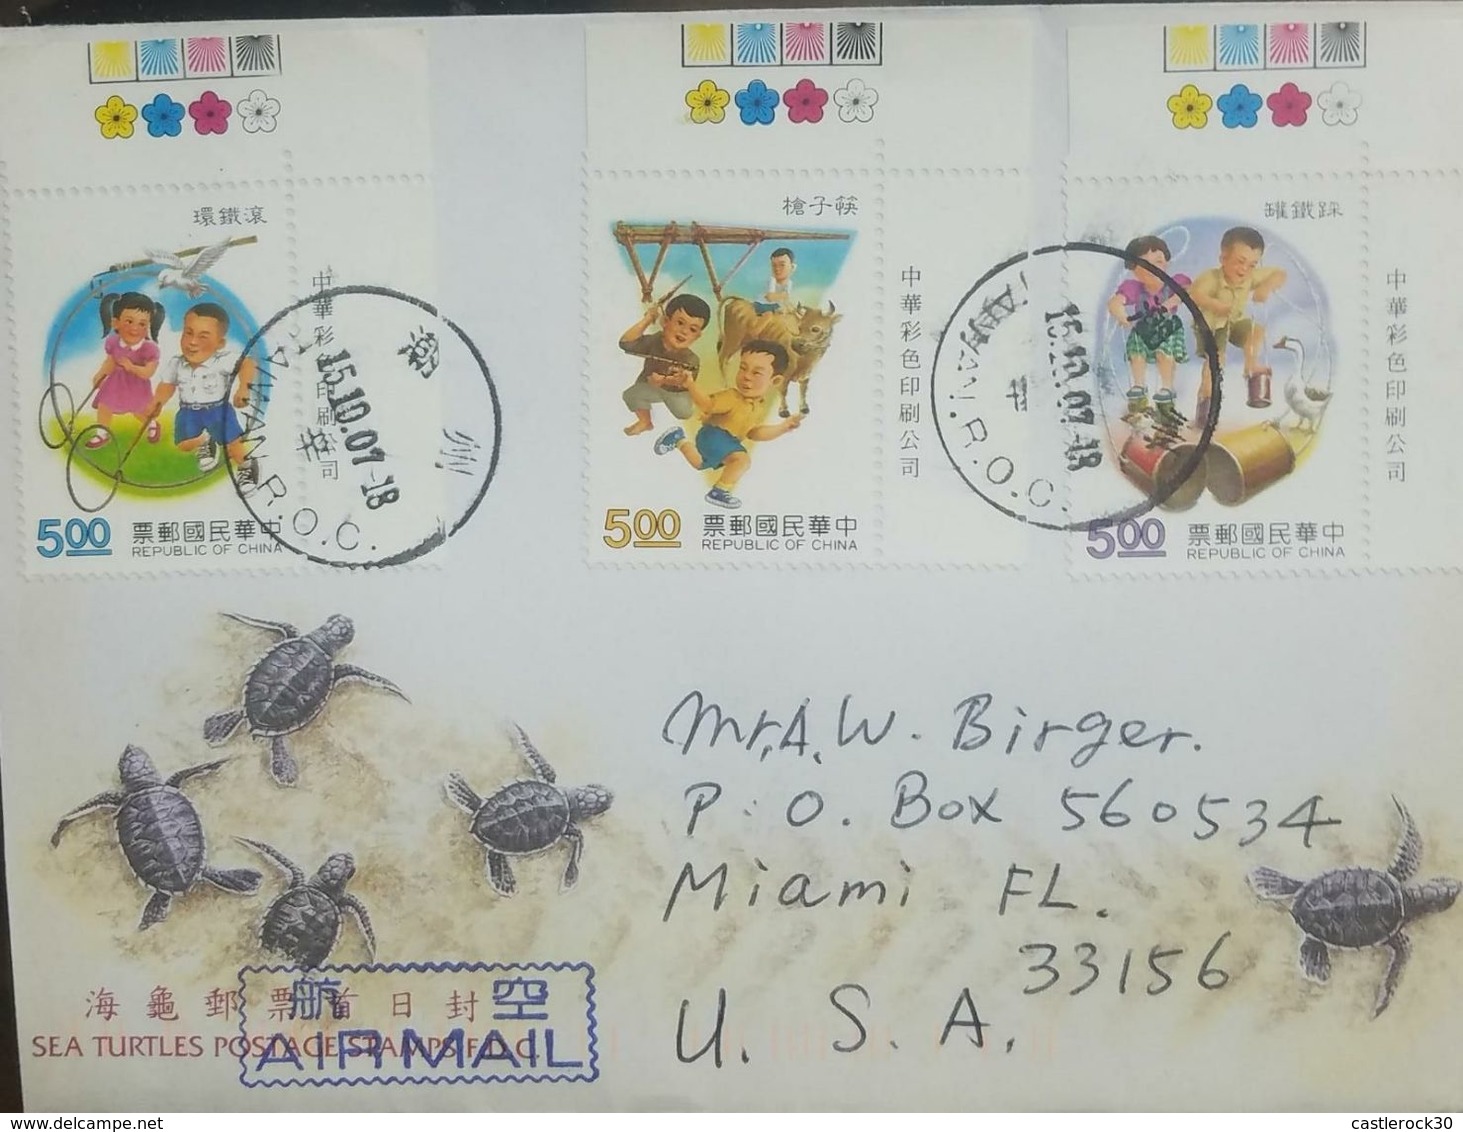 L) 2007 CHINA, TURTLES, CHILDREN, BIRD, BULL, DUCK, MULTIPLE STAMPS, CIRCULATED COVER FROM CHINA TO USA, AIR MAIL - Covers & Documents